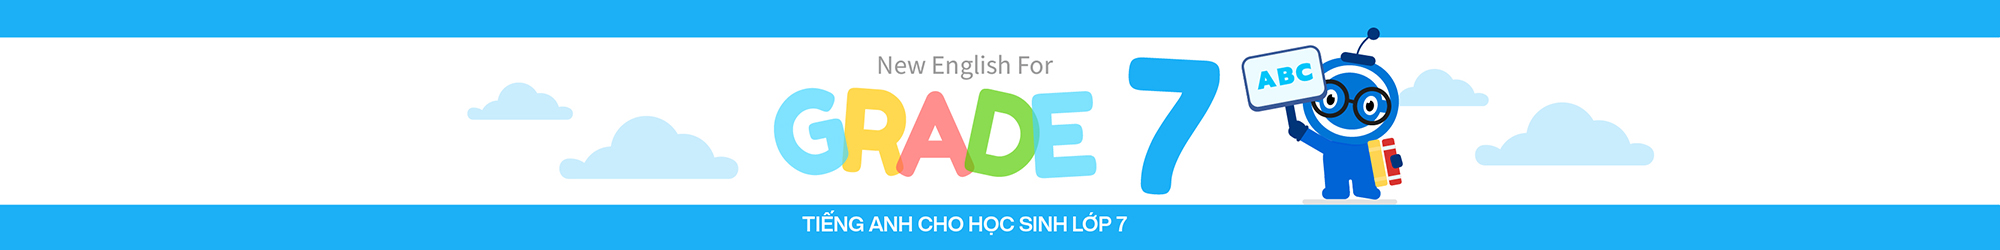 NEW ENGLISH FOR GRADE 7